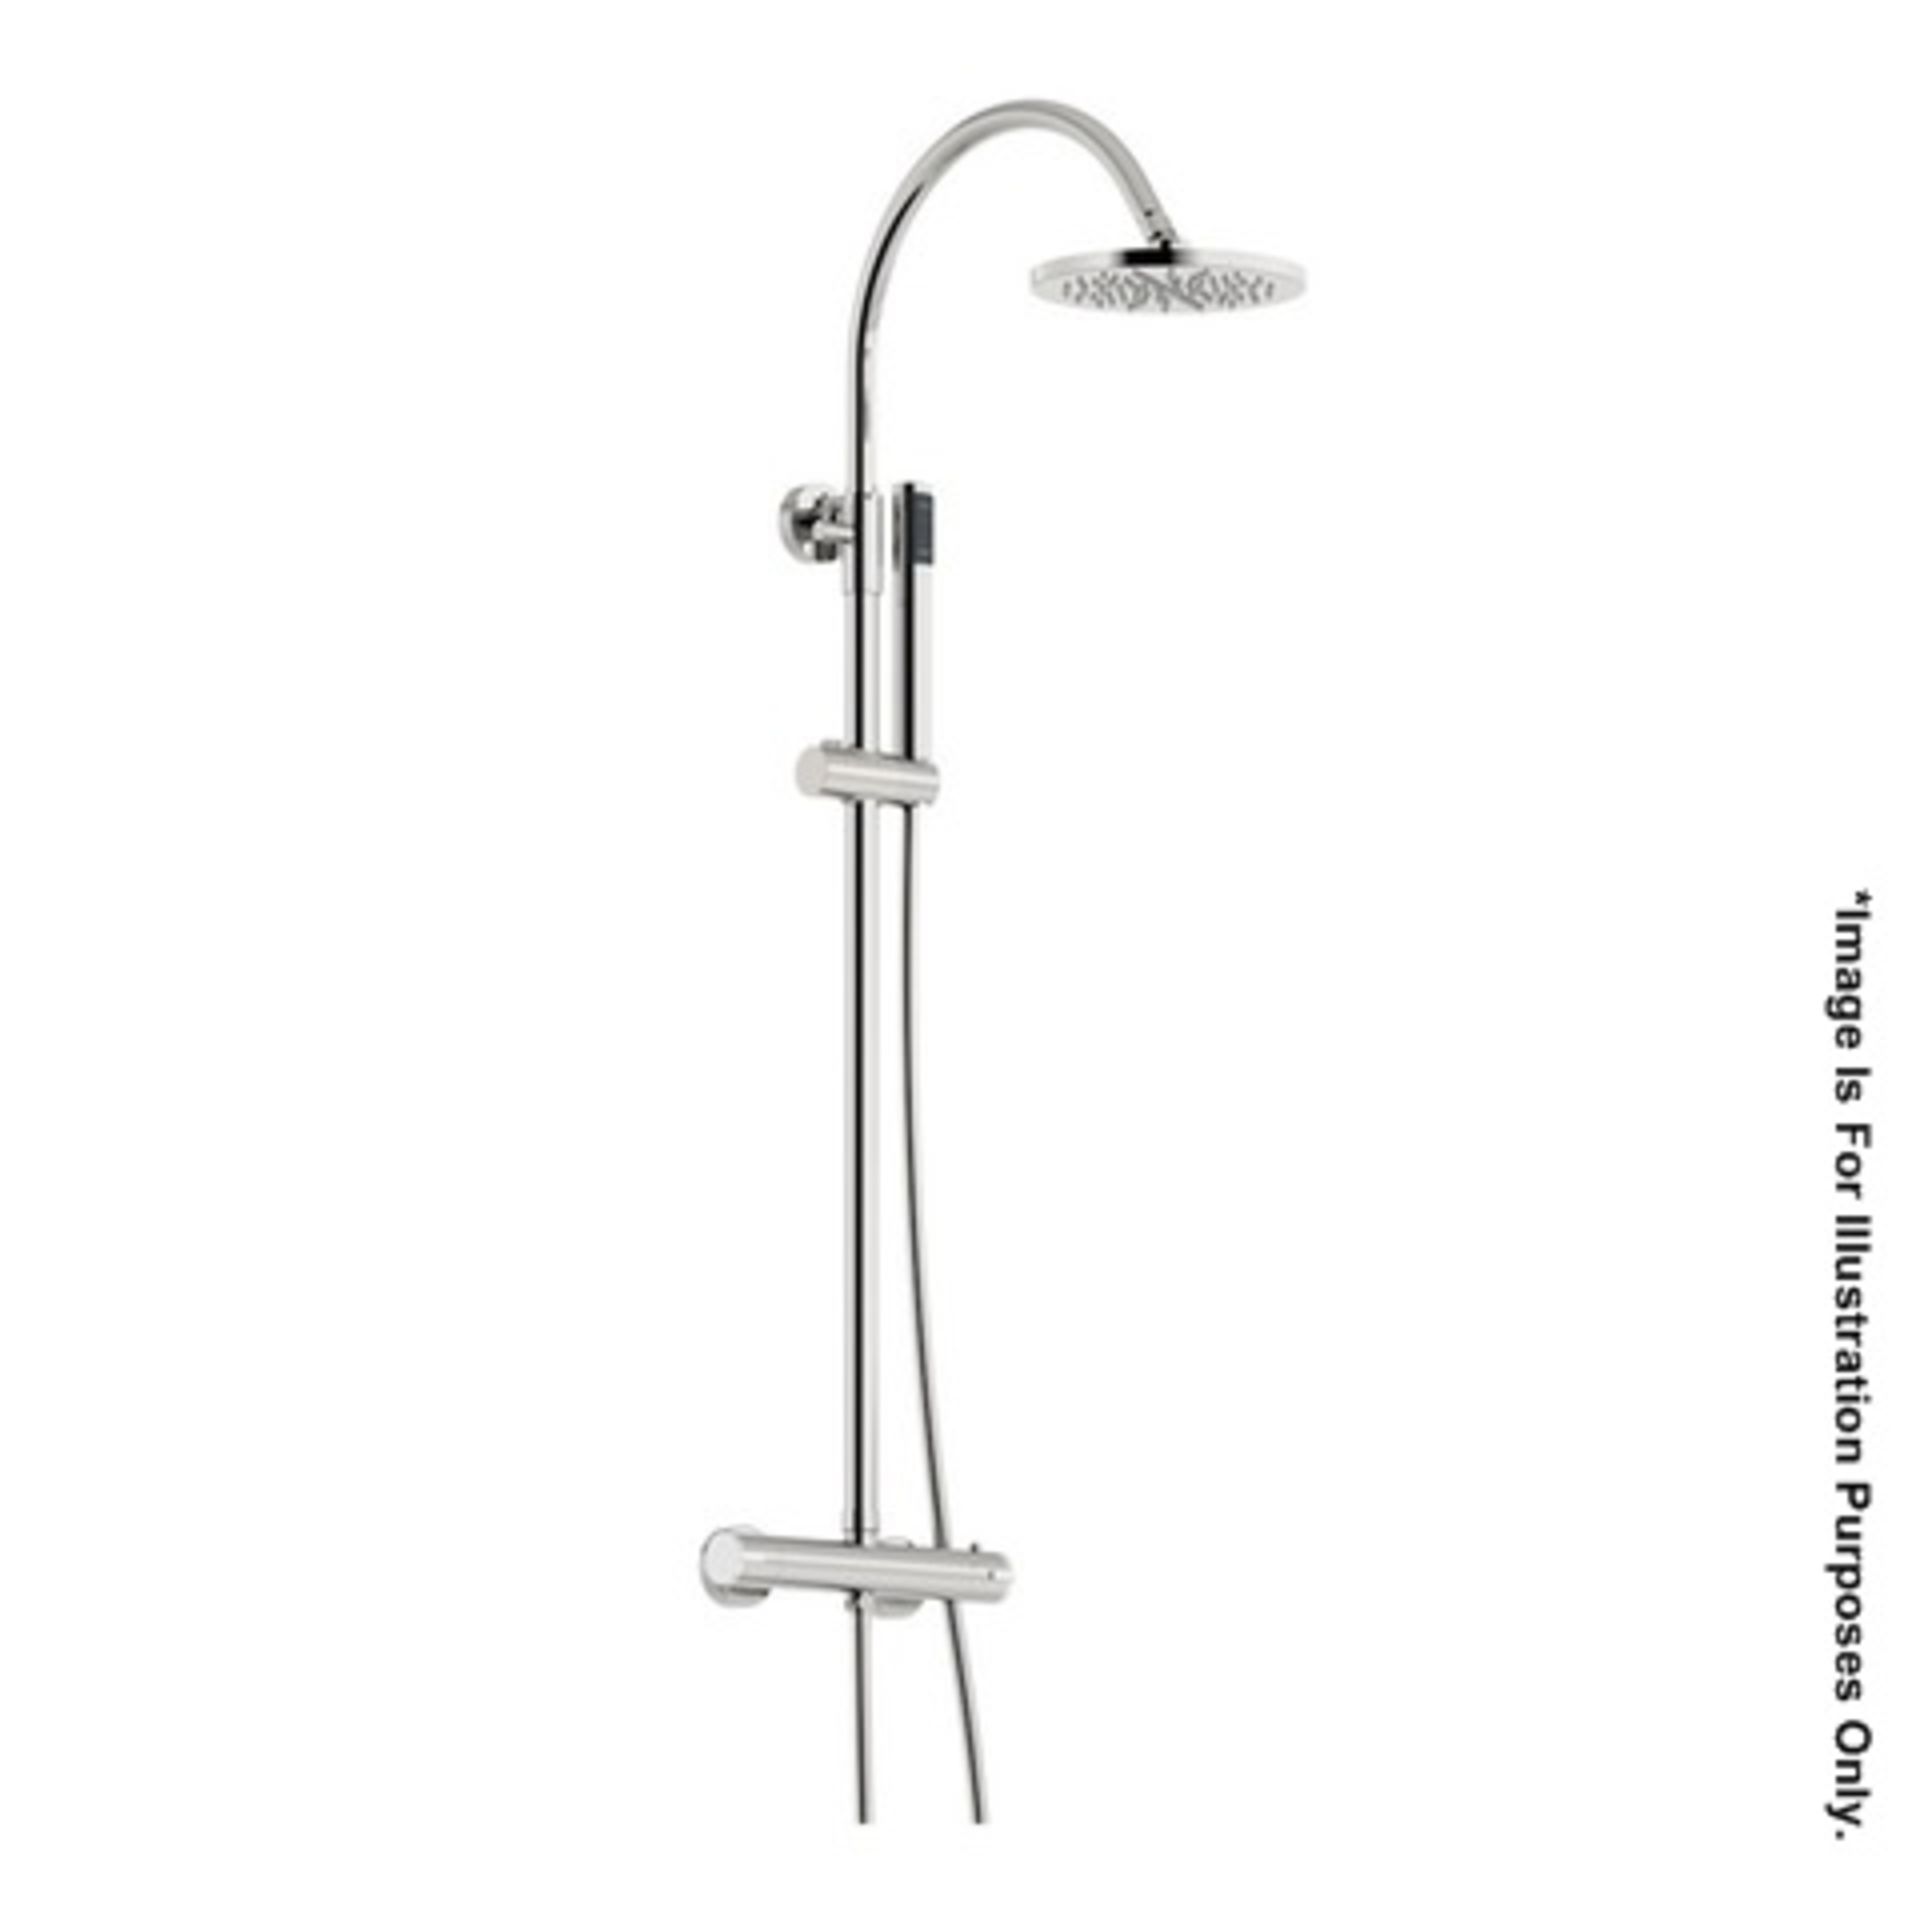 1 x ARIA Round Head Thermostatic Shower Kit - Chrome - CILISS4 - Ref: MBI027 - CL190 - Location: - Image 2 of 15